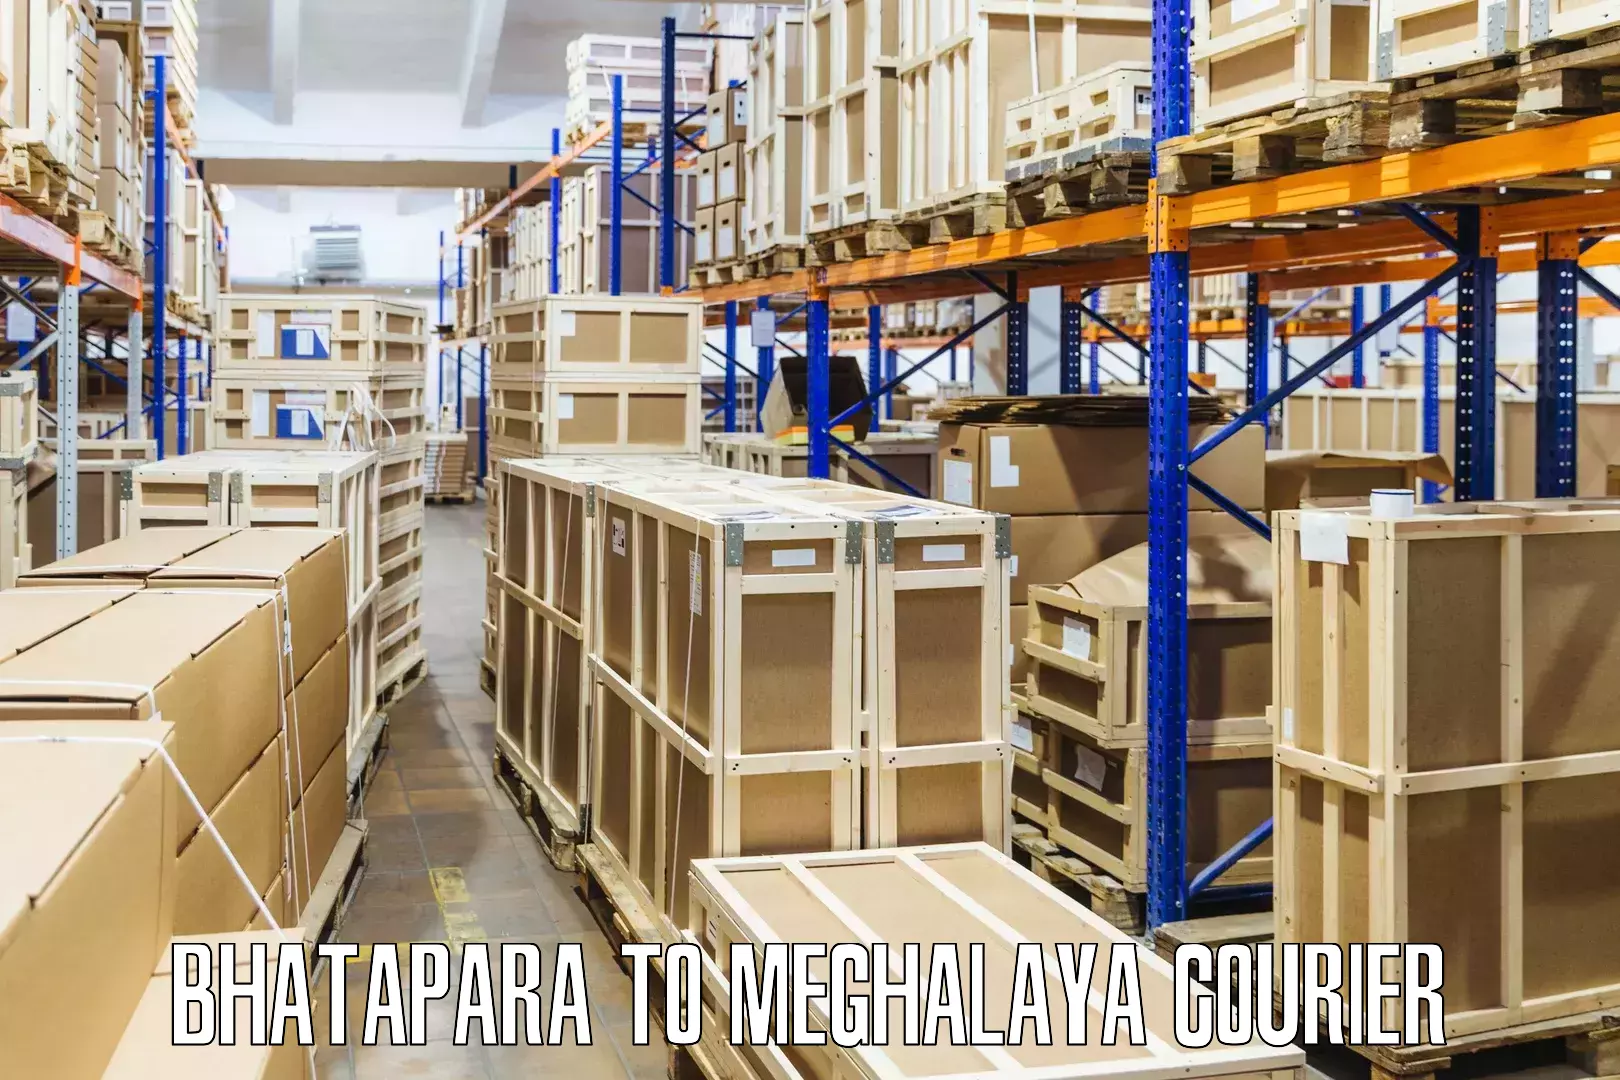 End-to-end delivery Bhatapara to Meghalaya